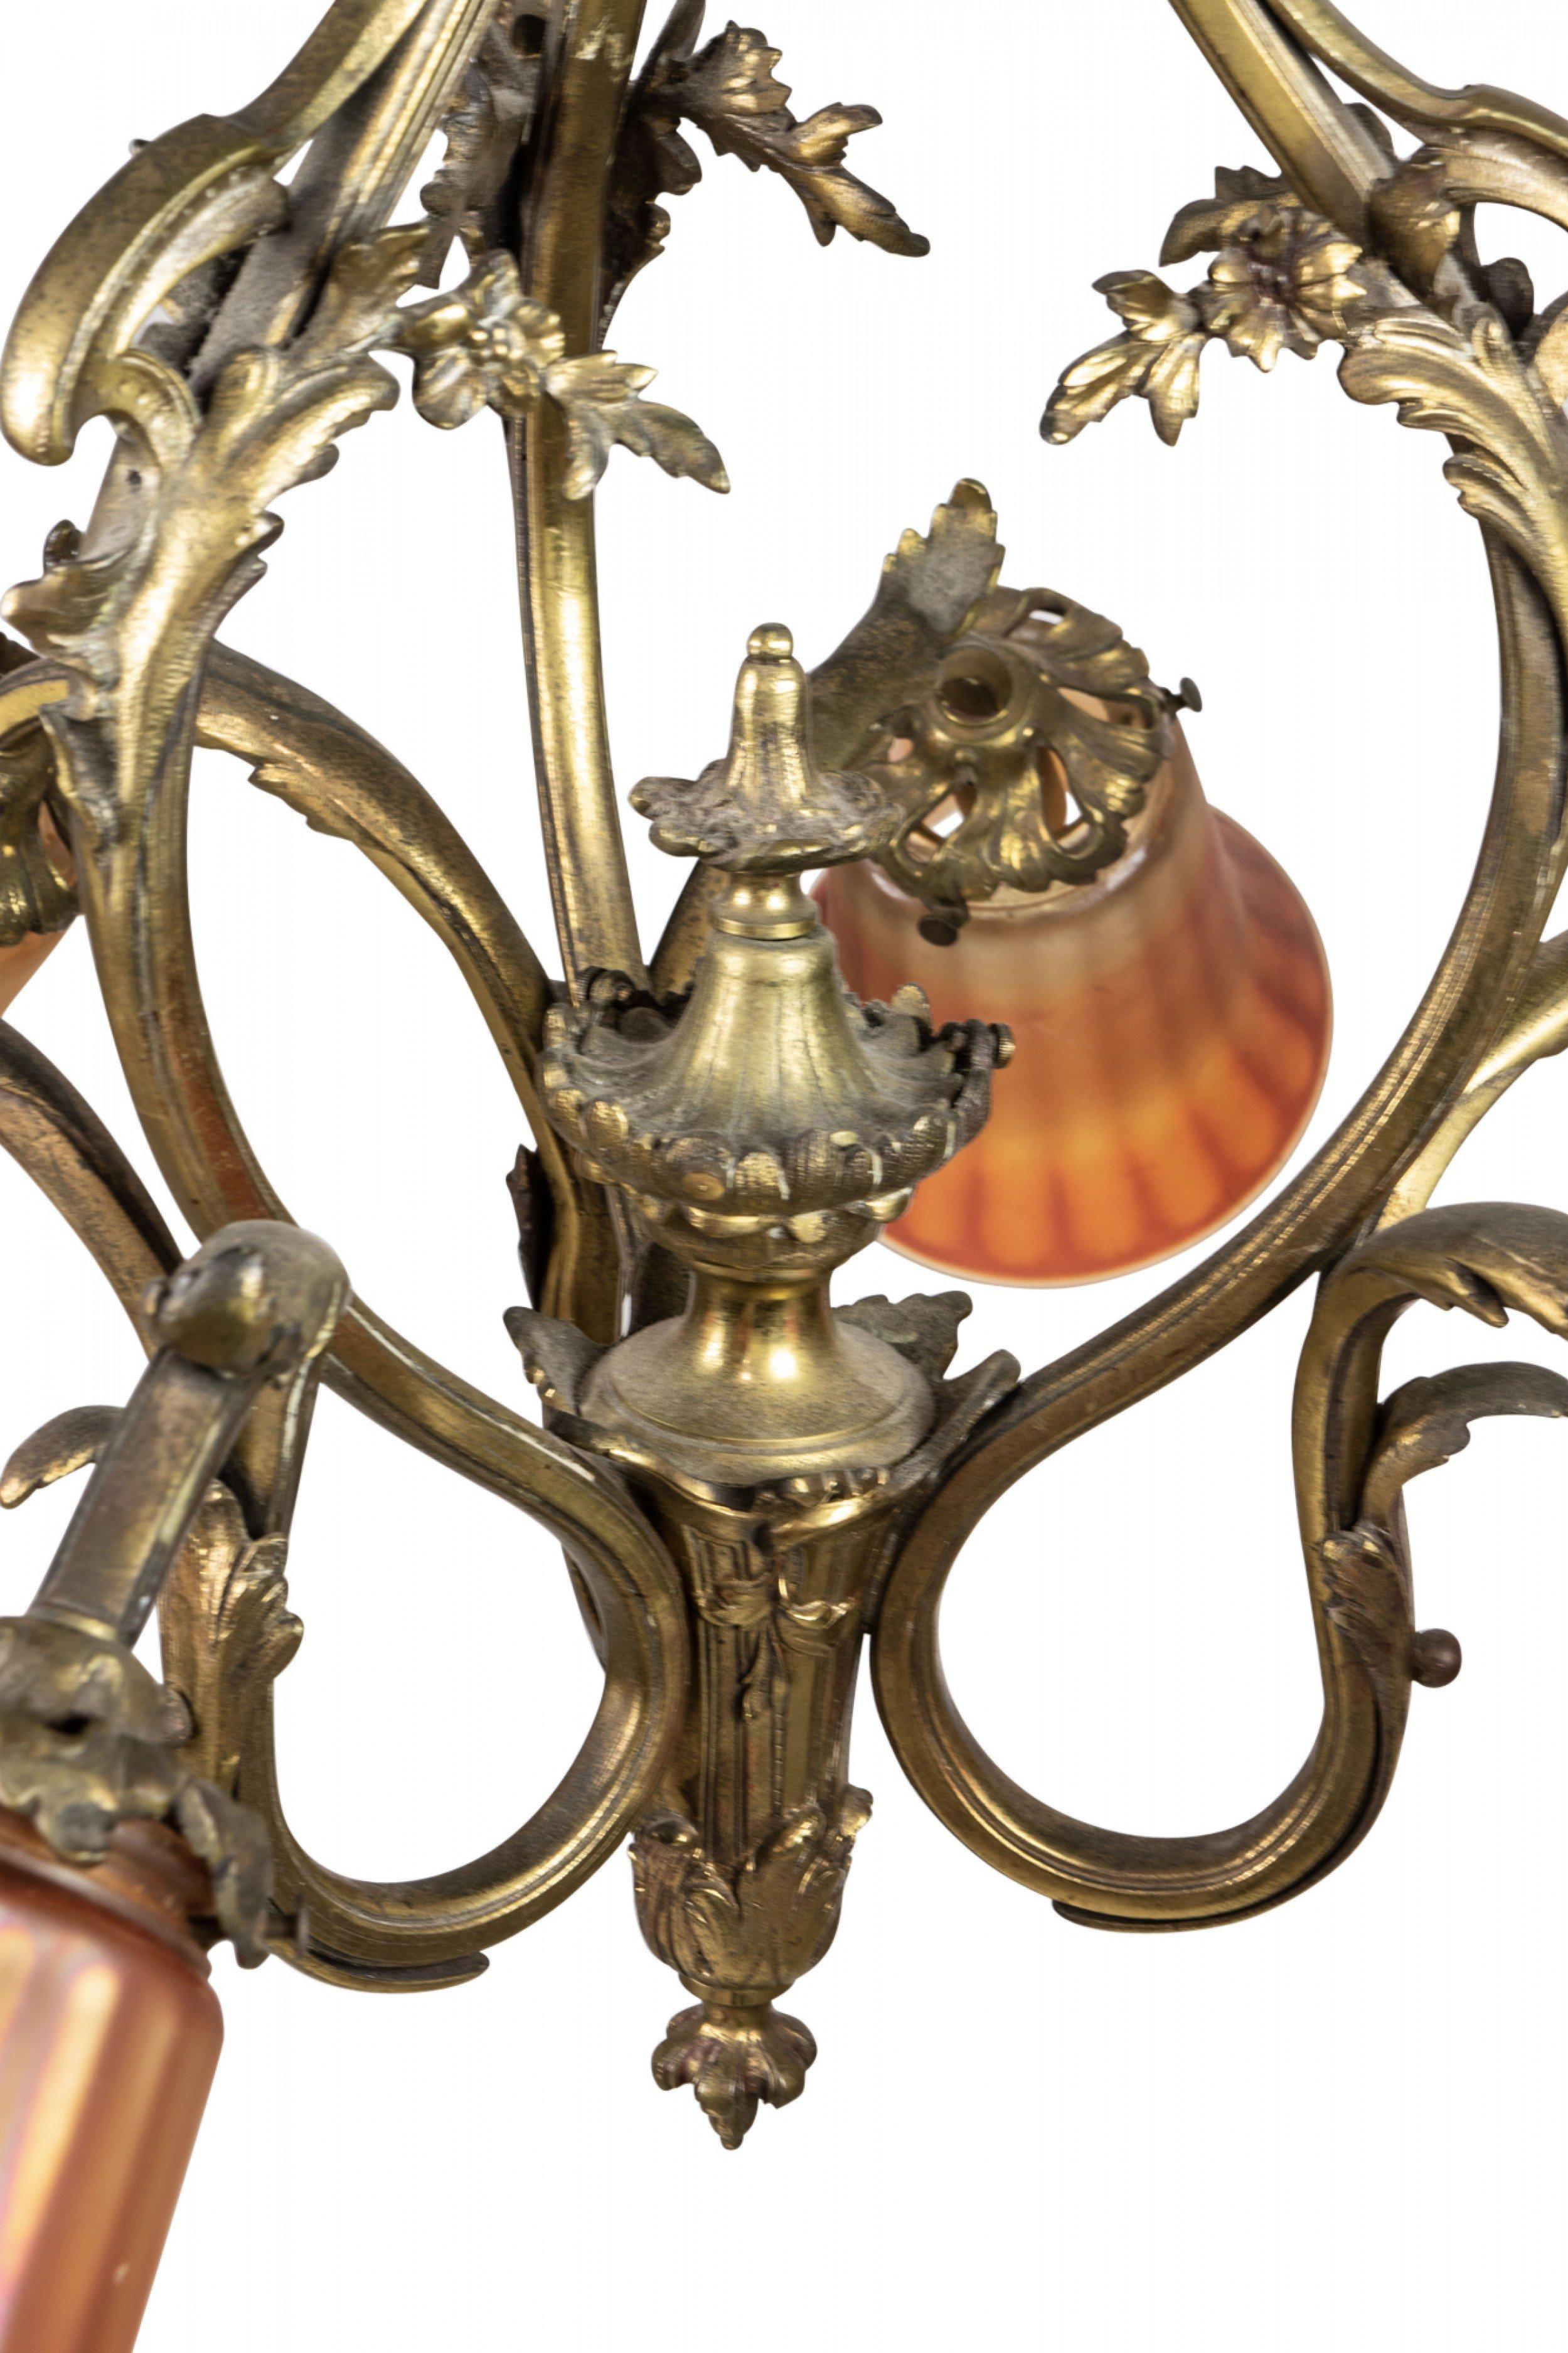 American Art Nouveau bronze 6 arm chandelier with a floral motif and 6 fluted orange and purple carnival glass shades / globes.